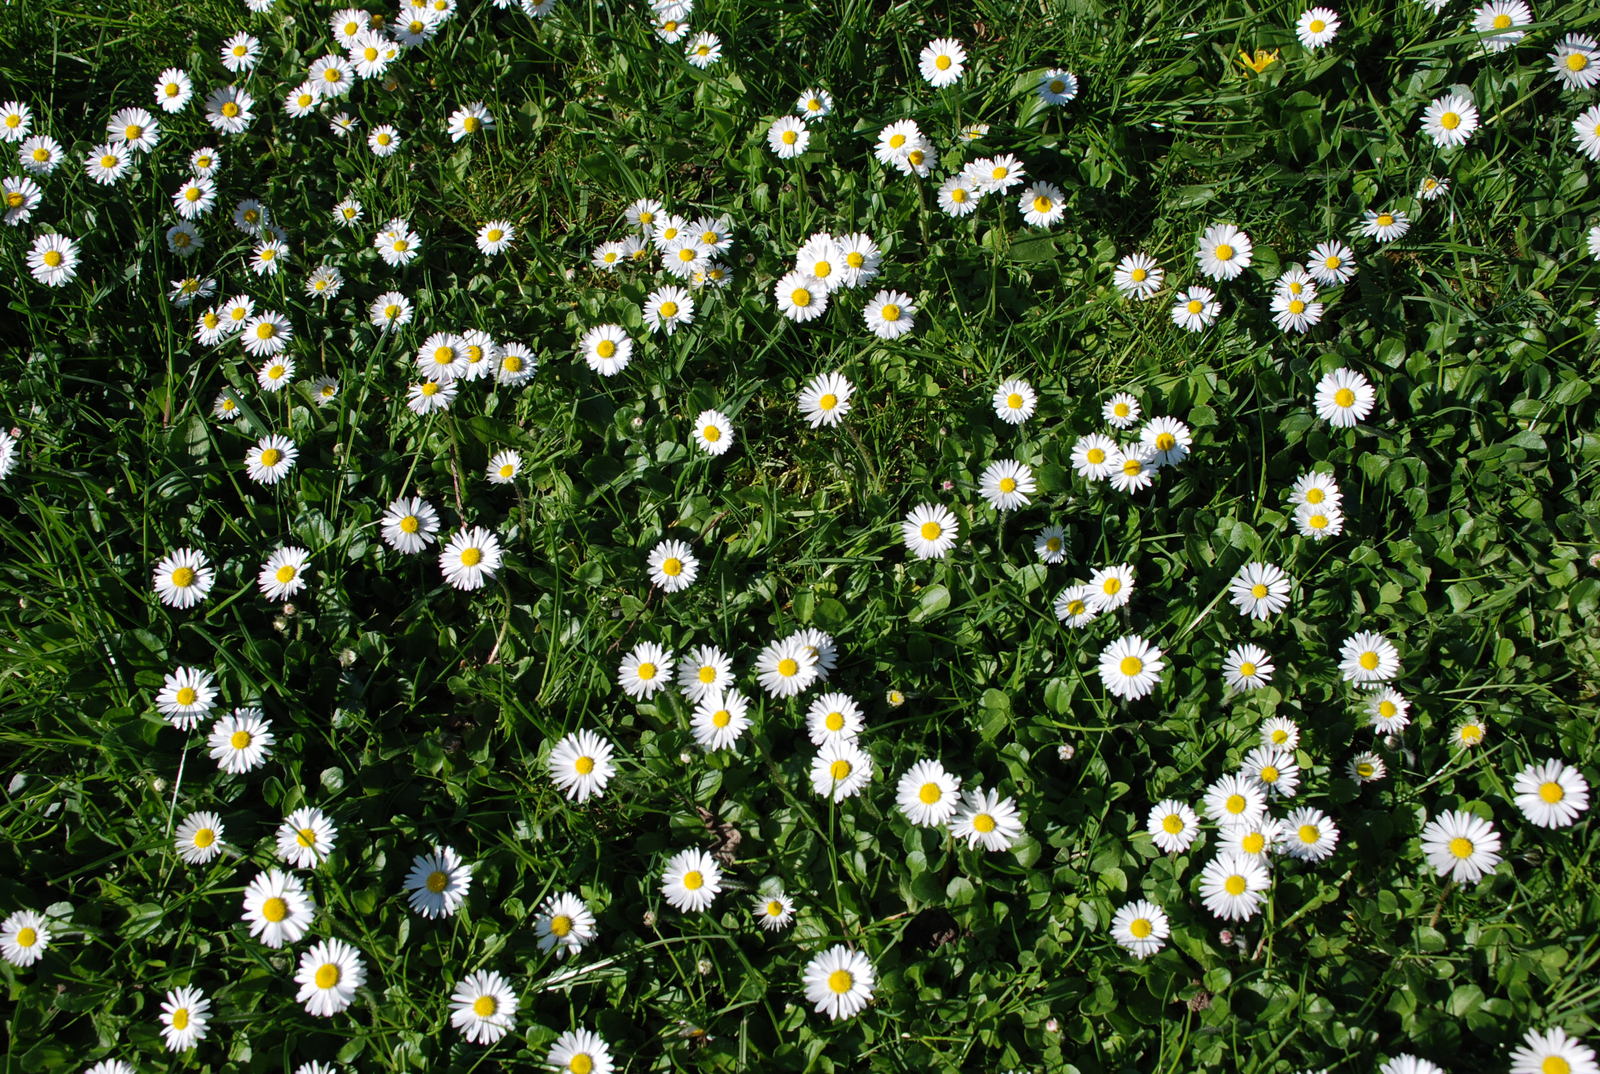 a lot of white and yellow flowers in the grass